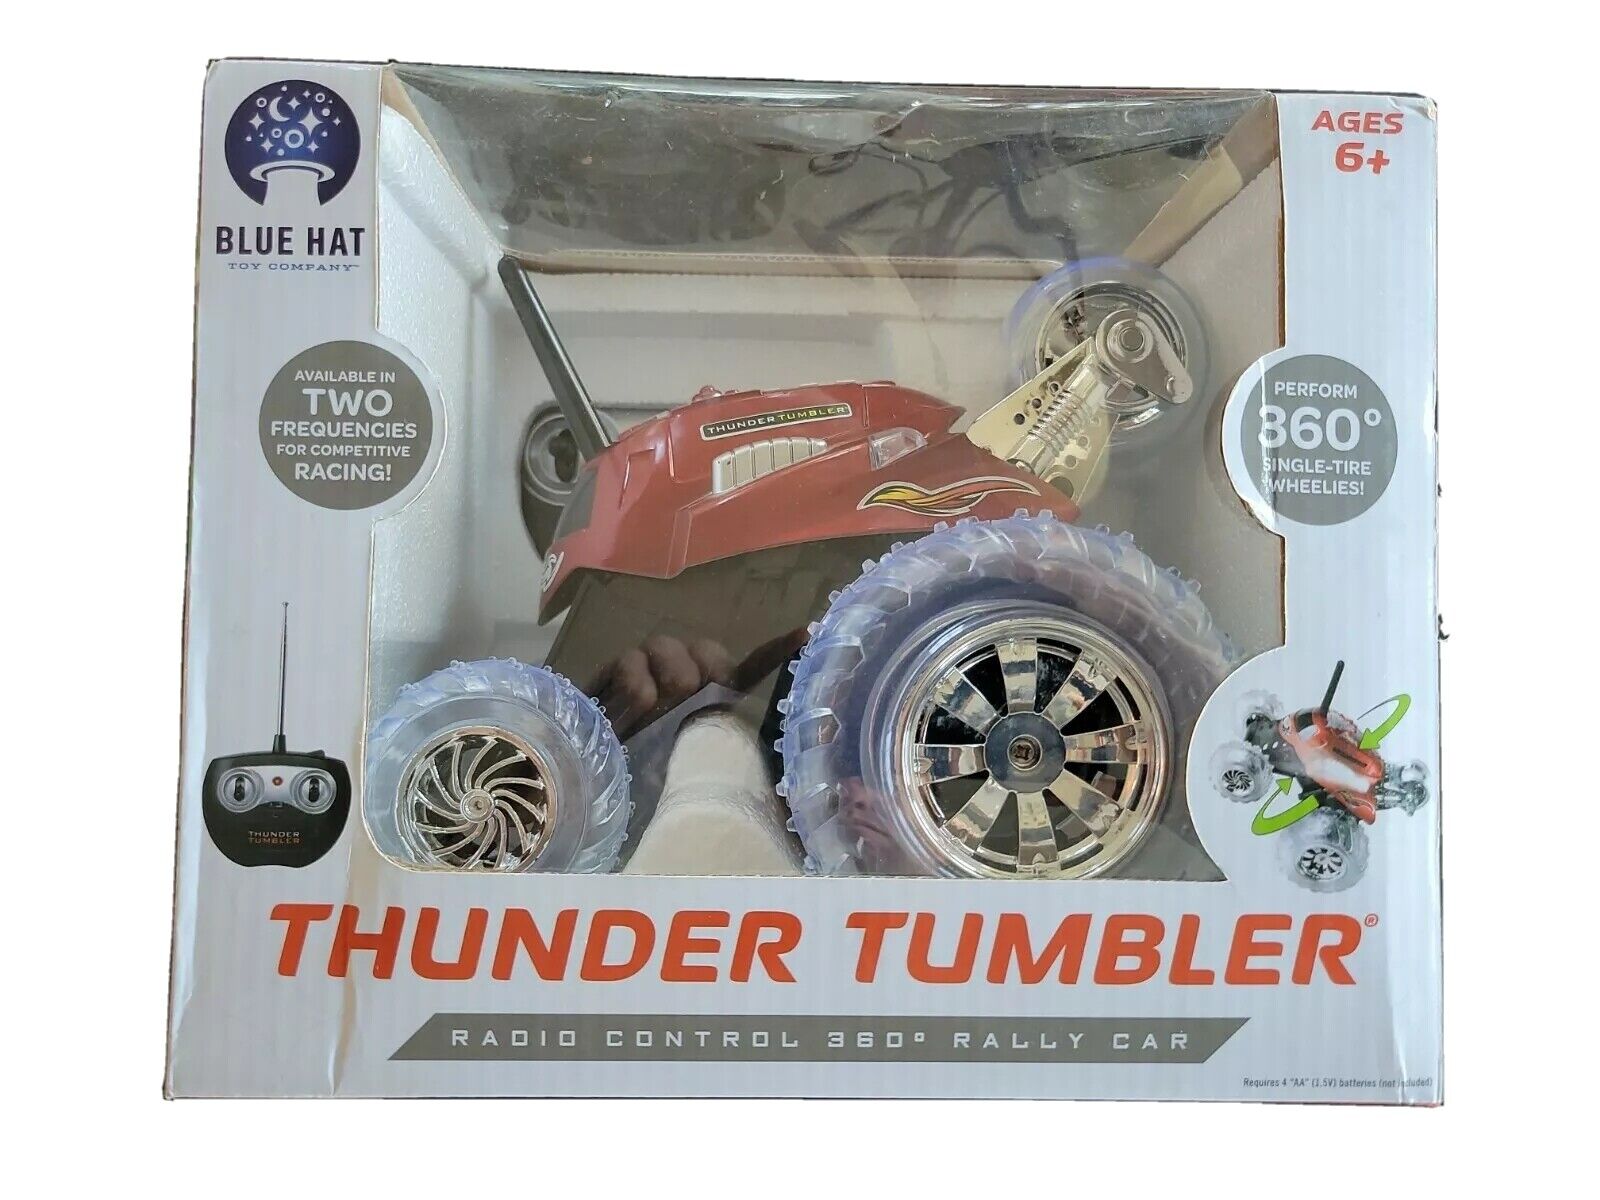 Thunder Tumbler - Radio Control 360 Ralley Car - Red Color in Box